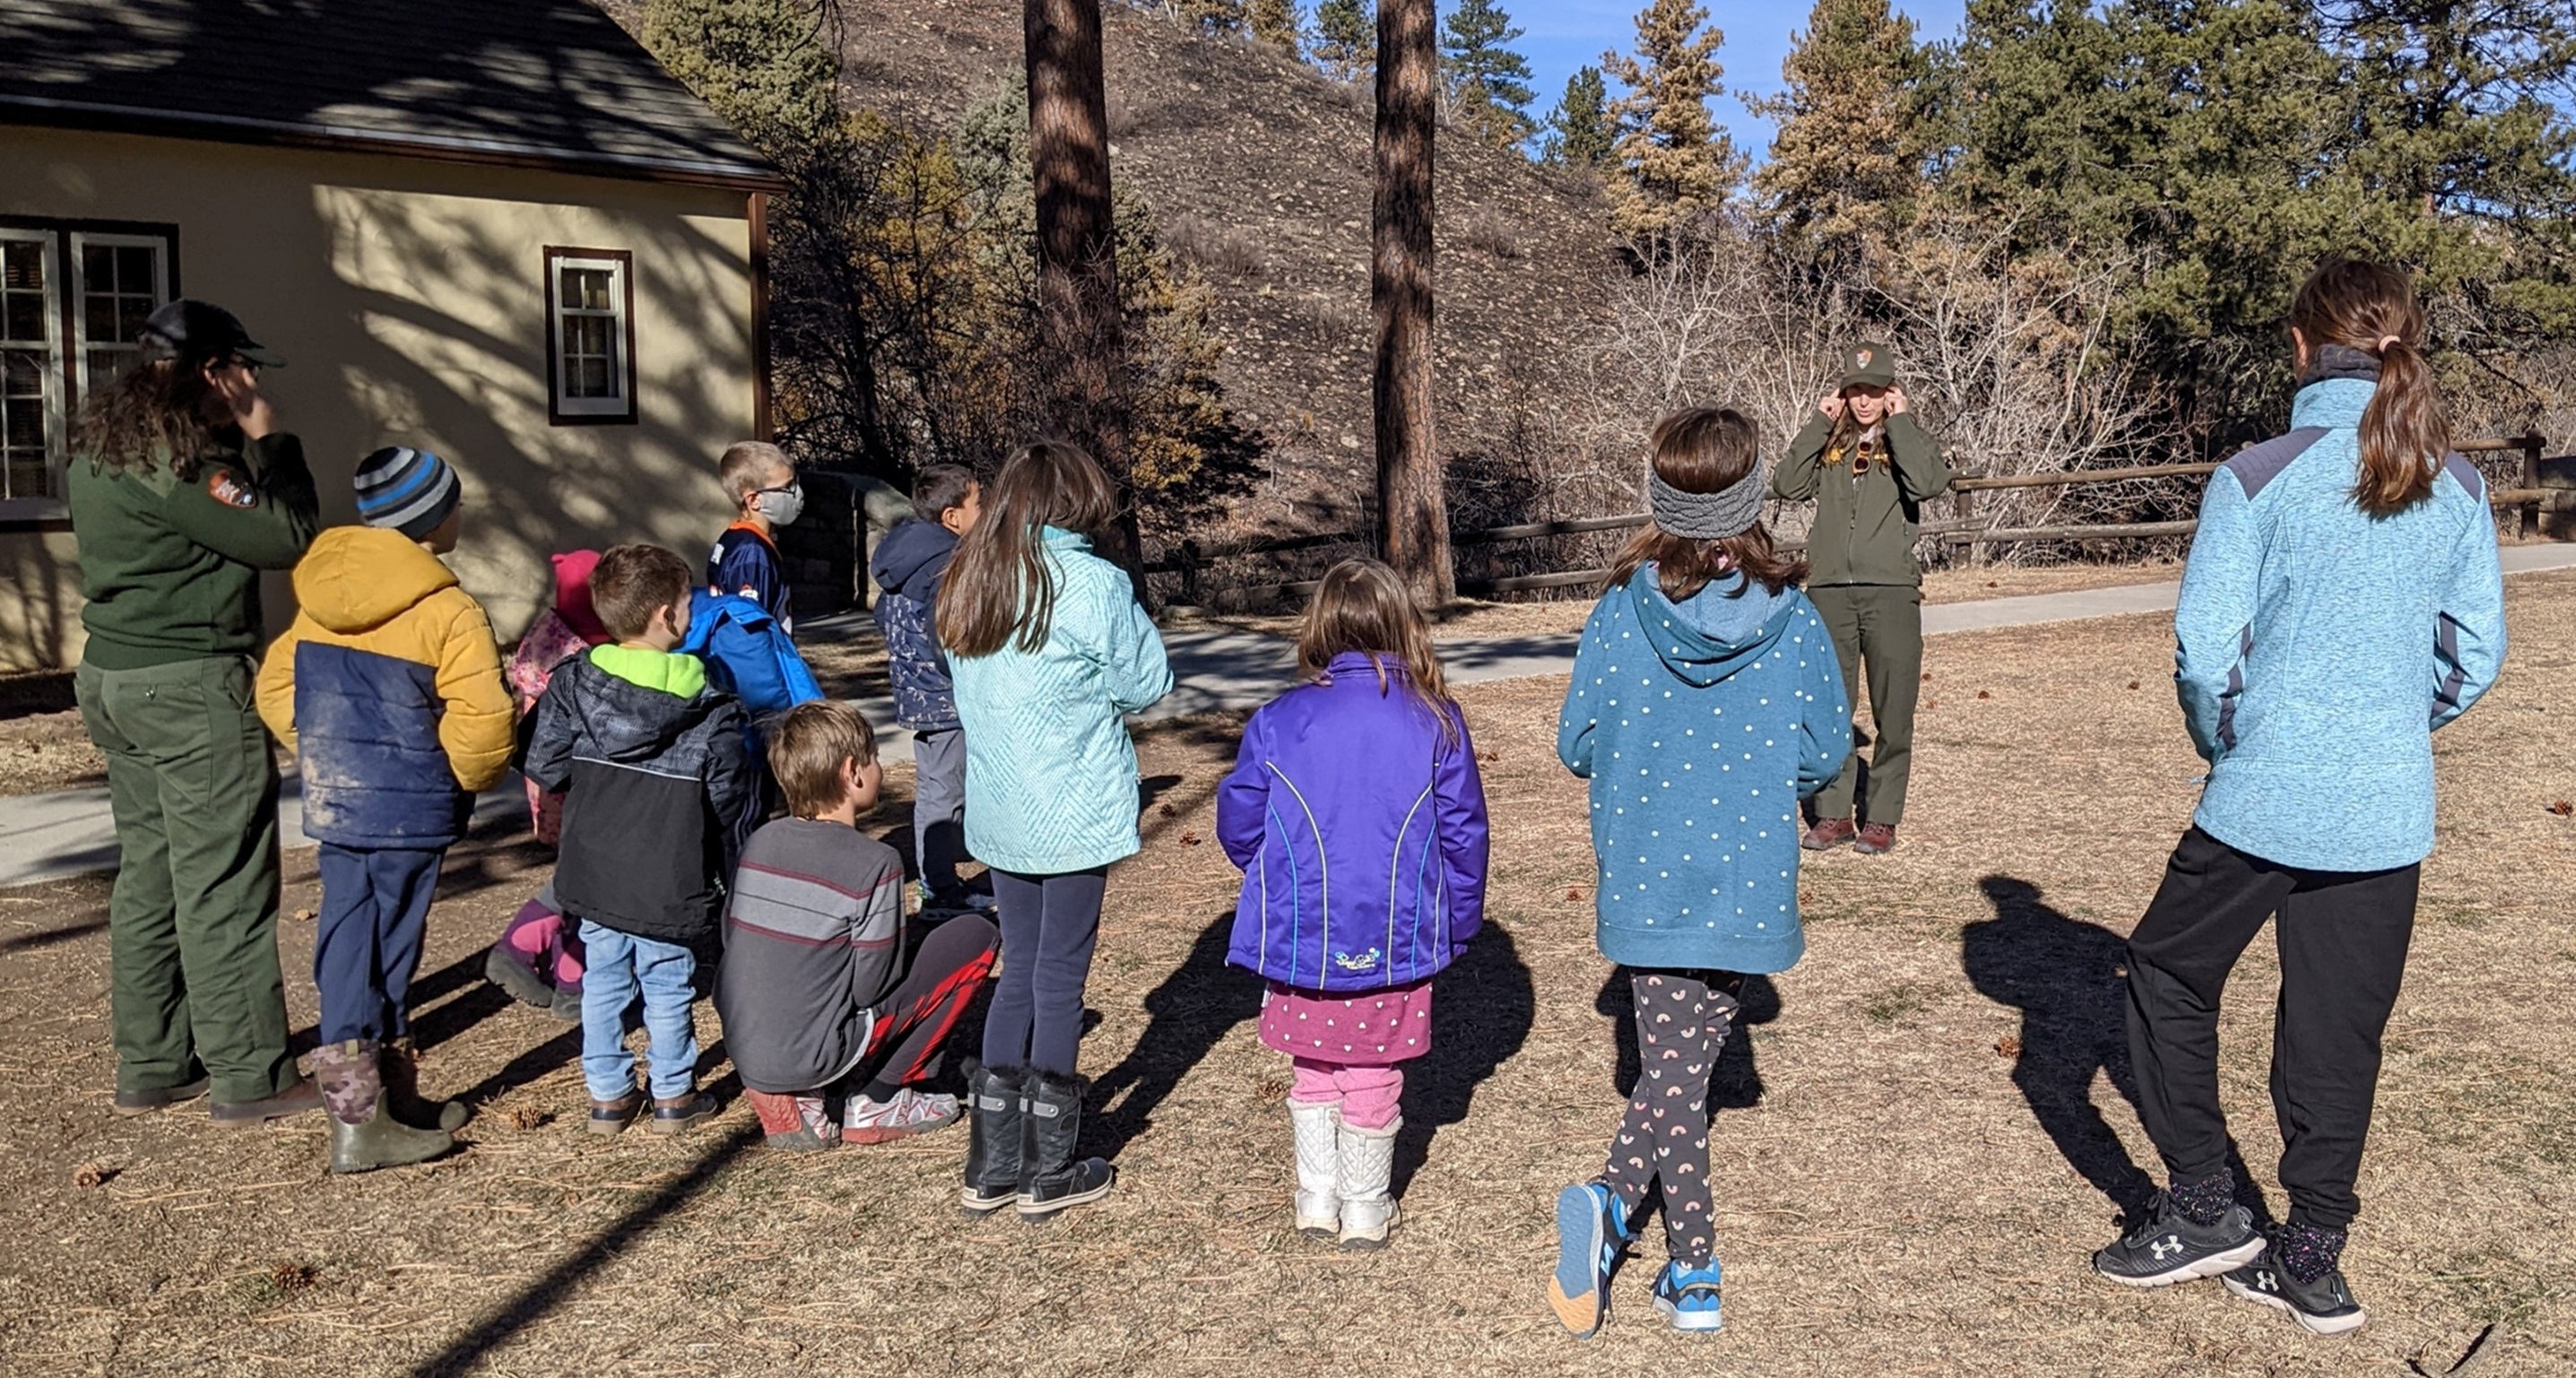 Young children with their backs to the camera dressed in winter coats standing on a brown lawn looking at a ranger in a green uniform who is talking to them. In the background is the corner of a yellow building with trees and a black hillside.